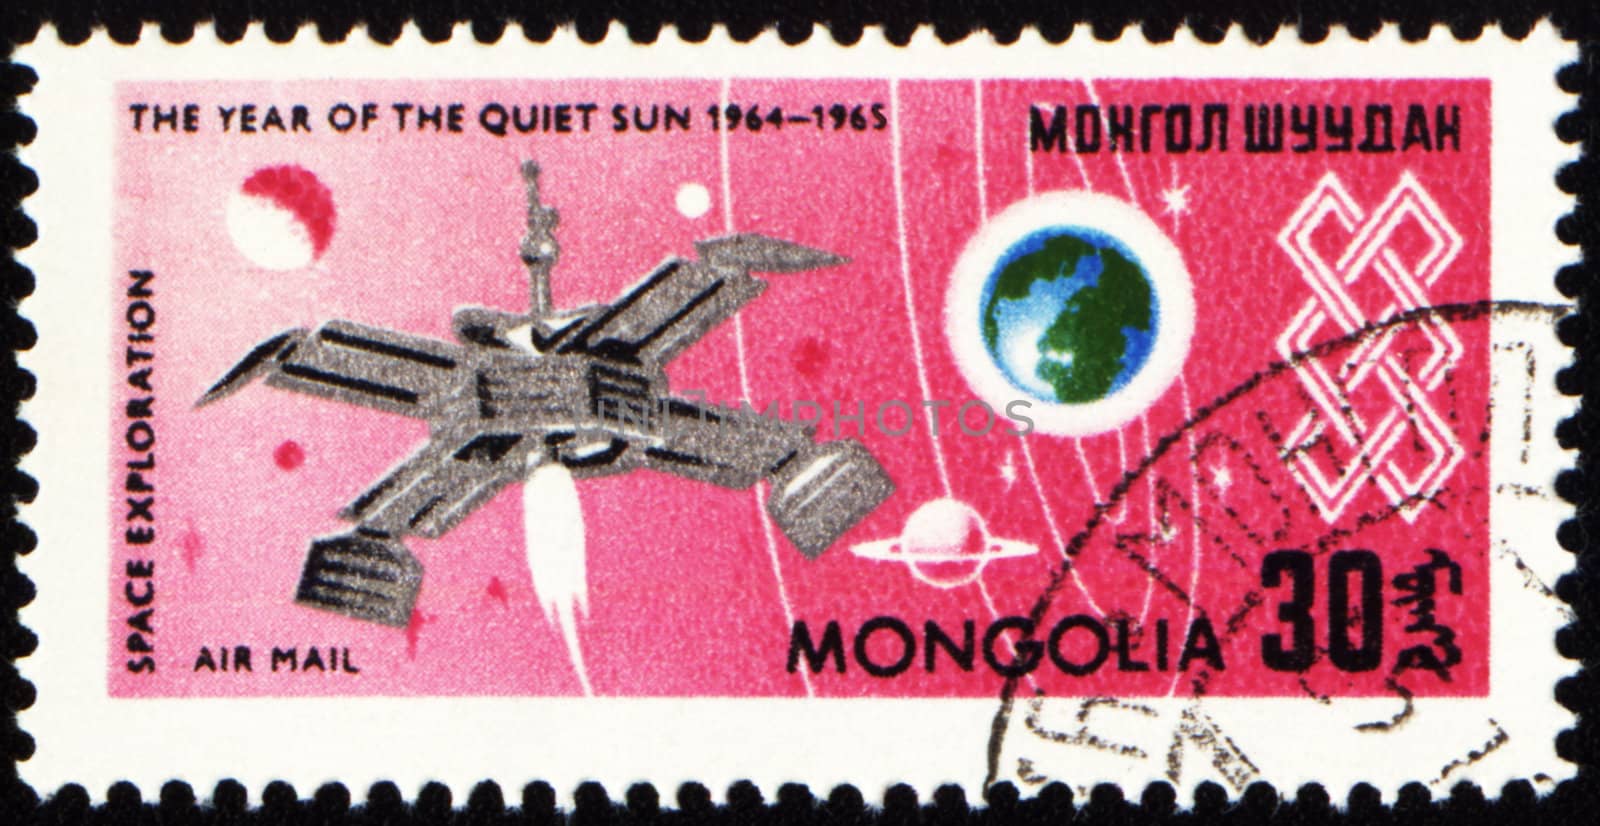 MONGOLIA - CIRCA 1965: stamp printed in Mongolia, shows spaceship on Earth orbit, devoted to the space exploration, series "The year of quiet Sun", circa 1965